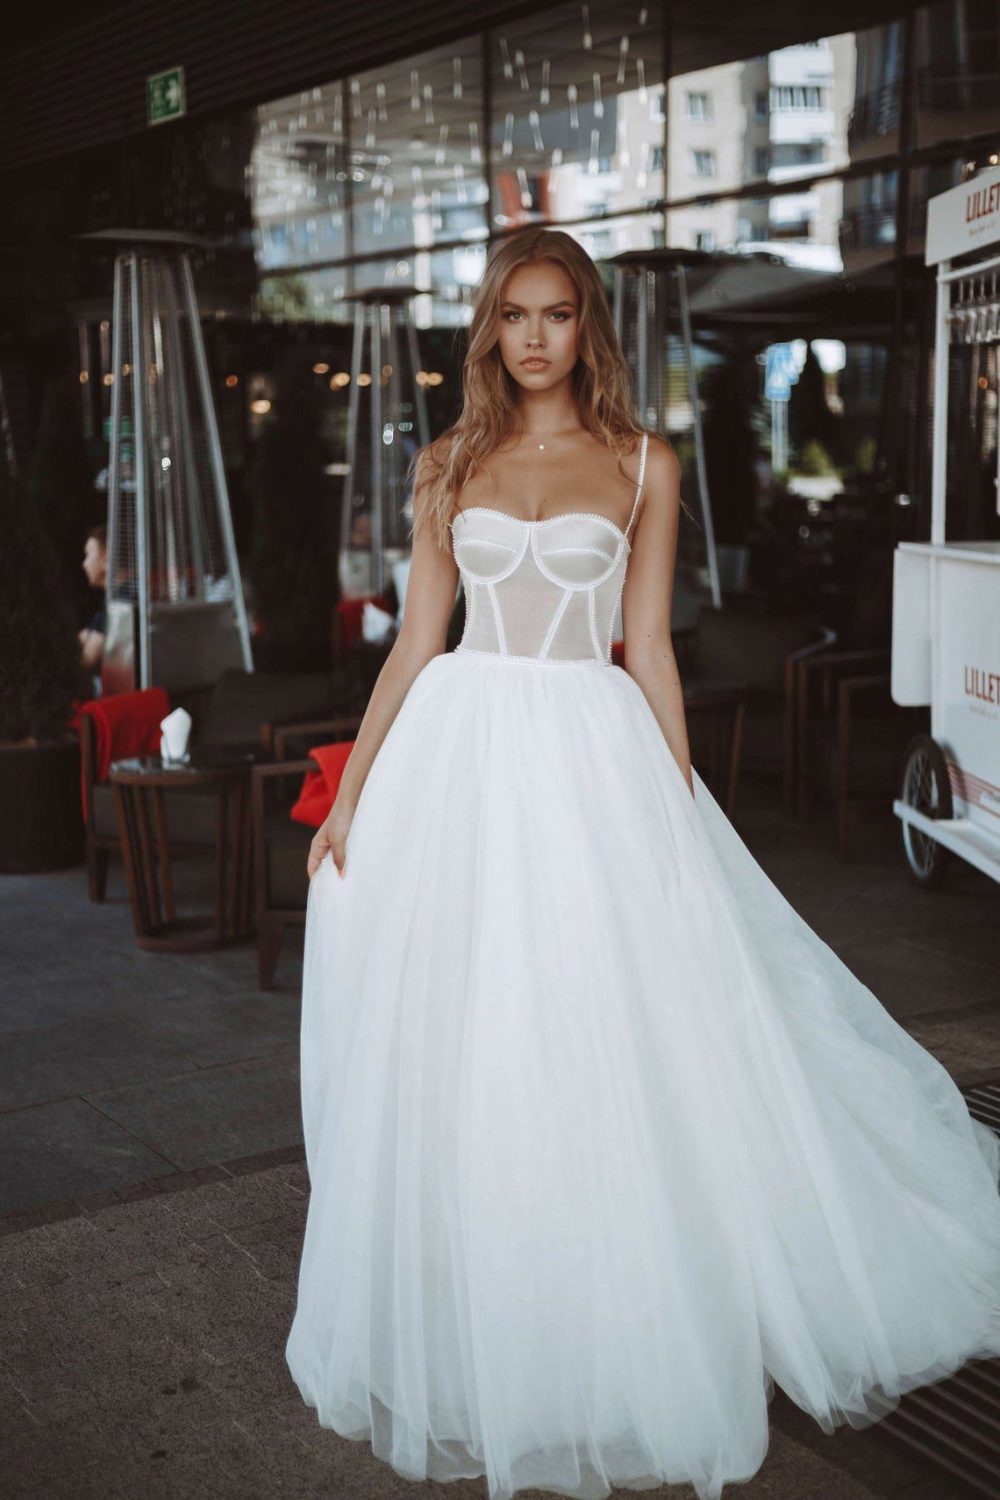 Rara Avis elegant A-line wedding dress Yang with the tulle skirt and fitted bodice with the sweetheart neckline and pearls decorations at Dell"Amore Bridal, NZ.1